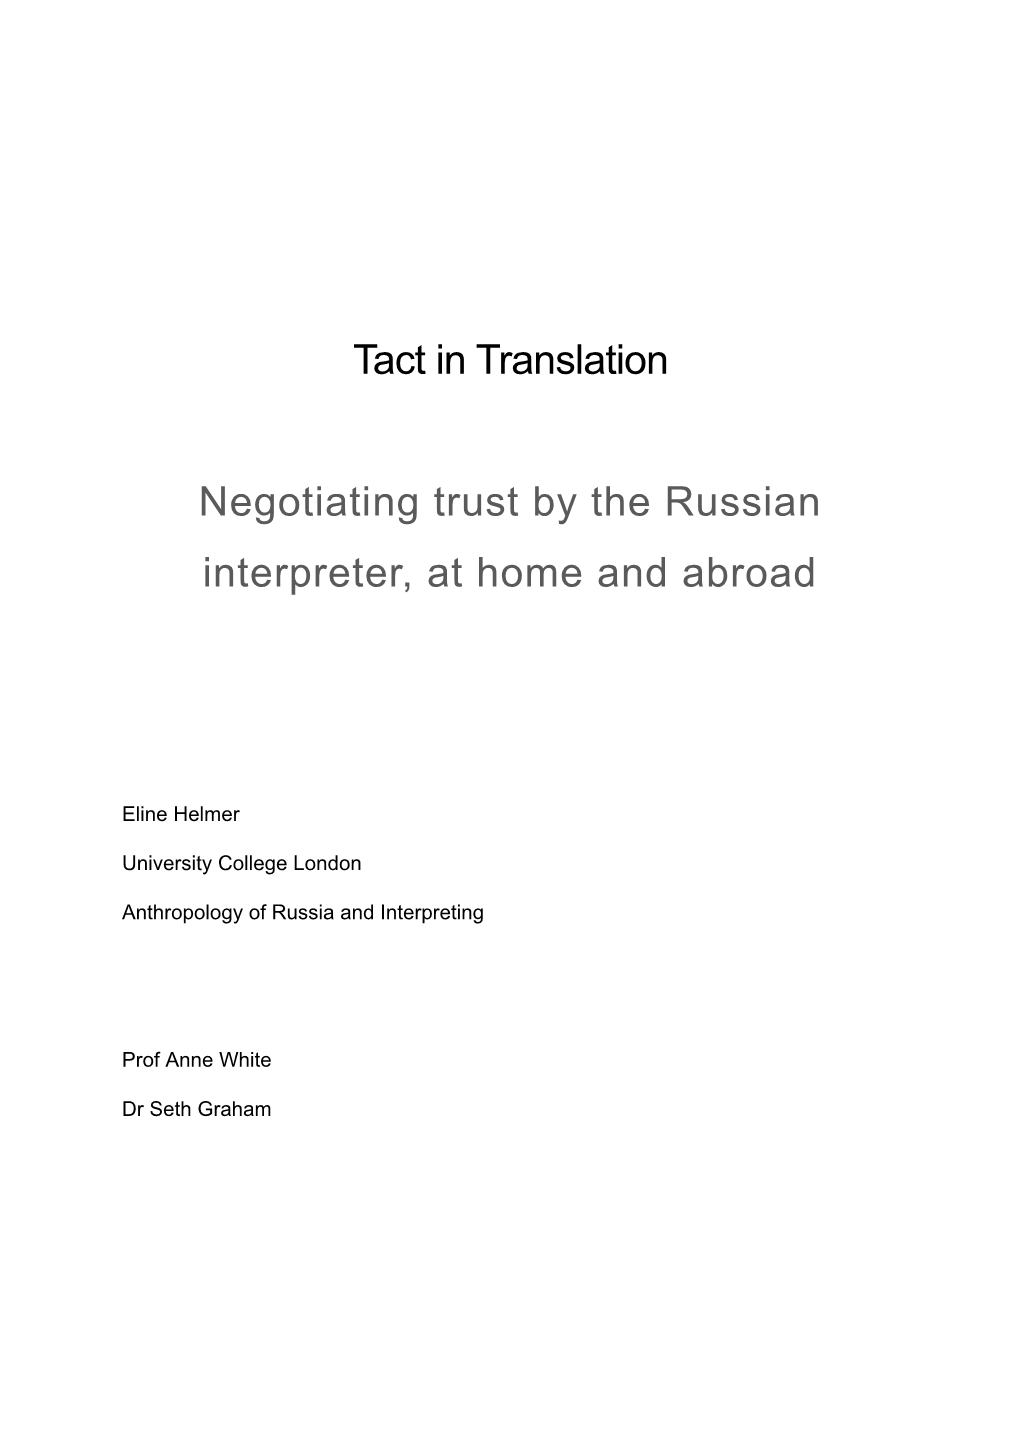 Tact in Translation Negotiating Trust by the Russian Interpreter, at Home